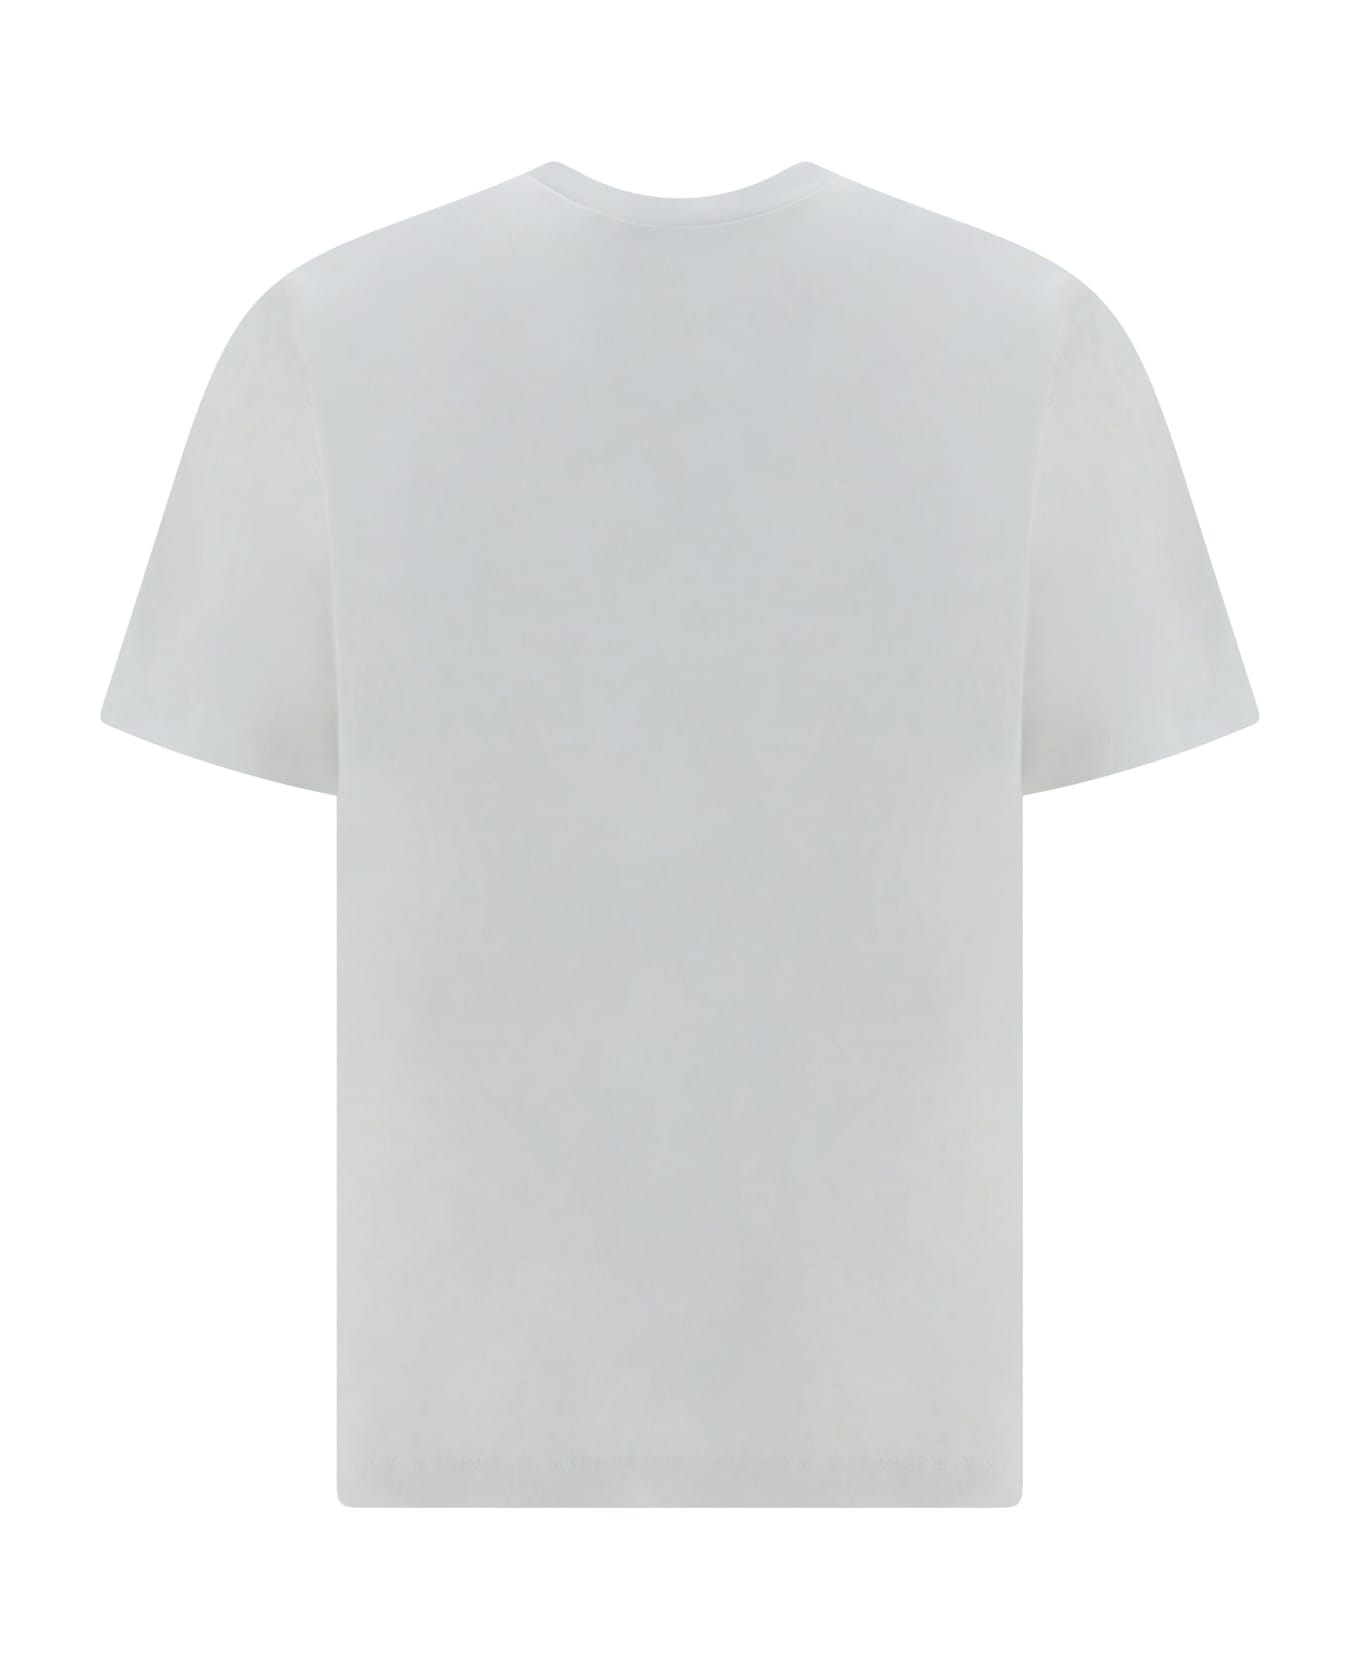 Dsquared2 Cotton T-shirt With Iconic Print - White